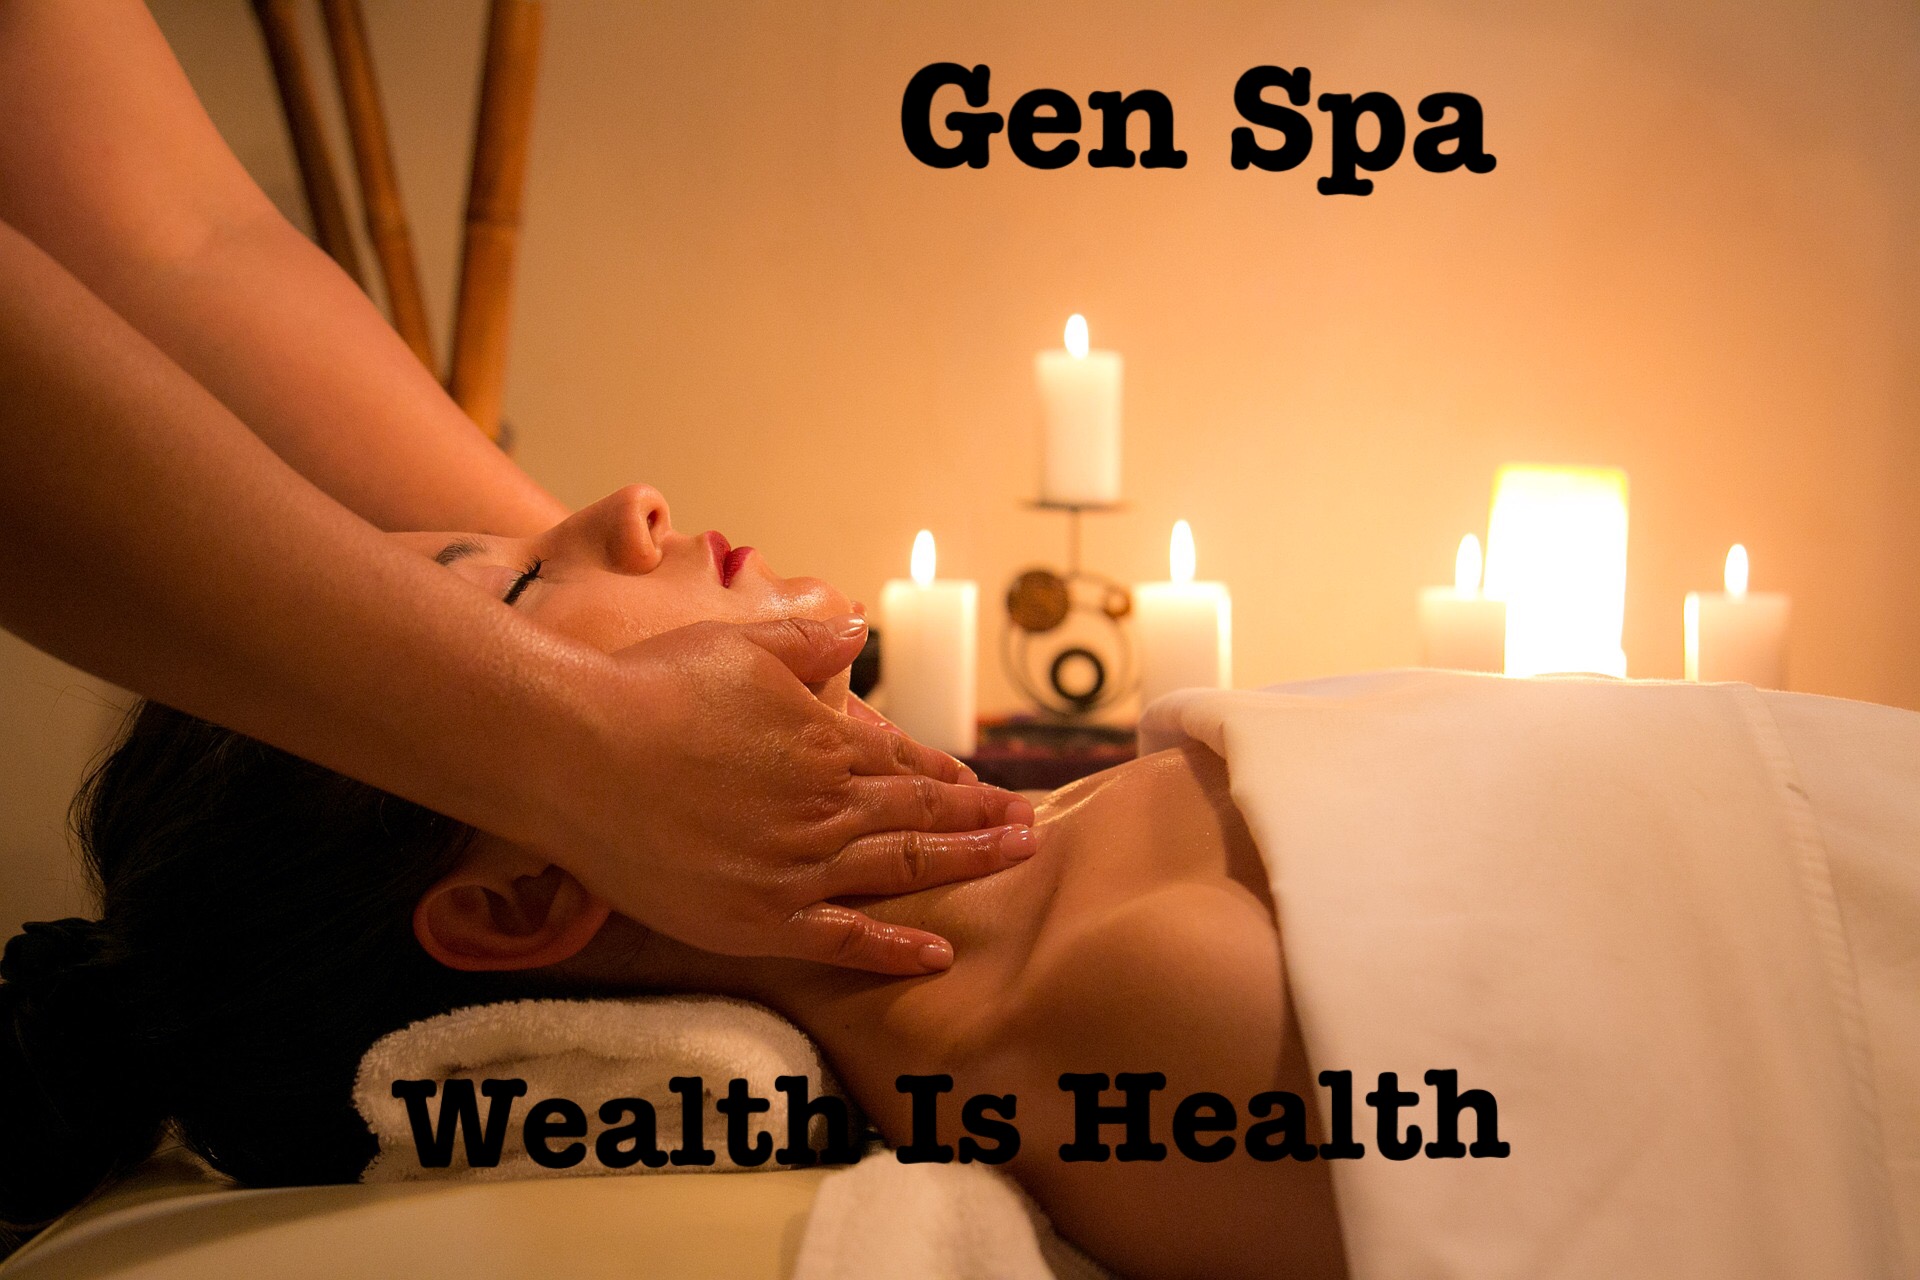 Creative Bodyworks at Gen Spa Massage Therapy offer: